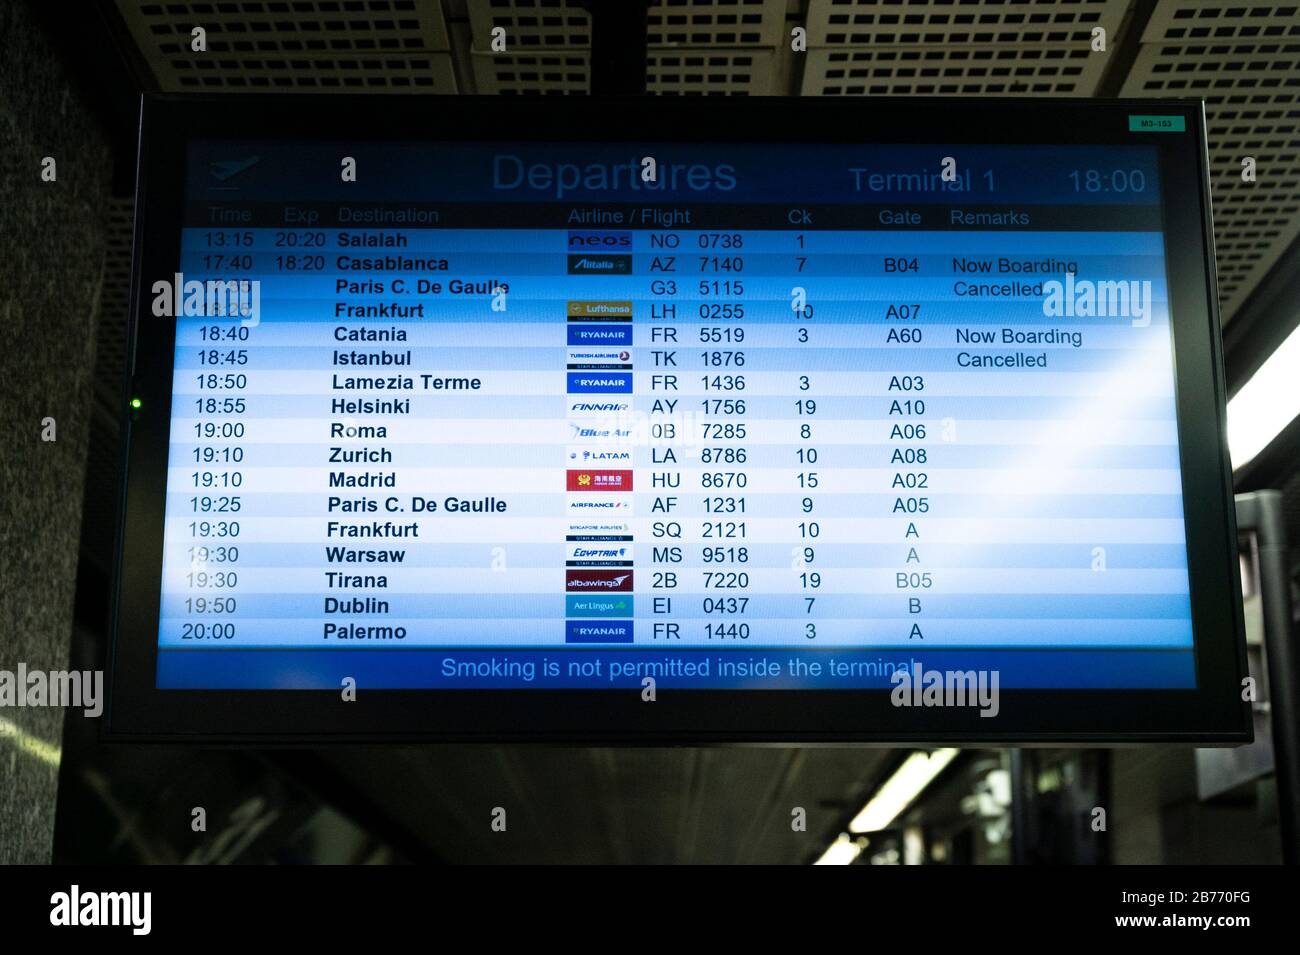 Screen showing flight details following the corona virus outbreak.Due to the rapid spreading of Coronavirus, in Italy many companies cancelled their flights to and from Italy. Few passengers were seen in Malpensa airport wearing facial masks as people working at the airport denounce a worrying situation, showing concerns for their jobs and future. Stock Photo